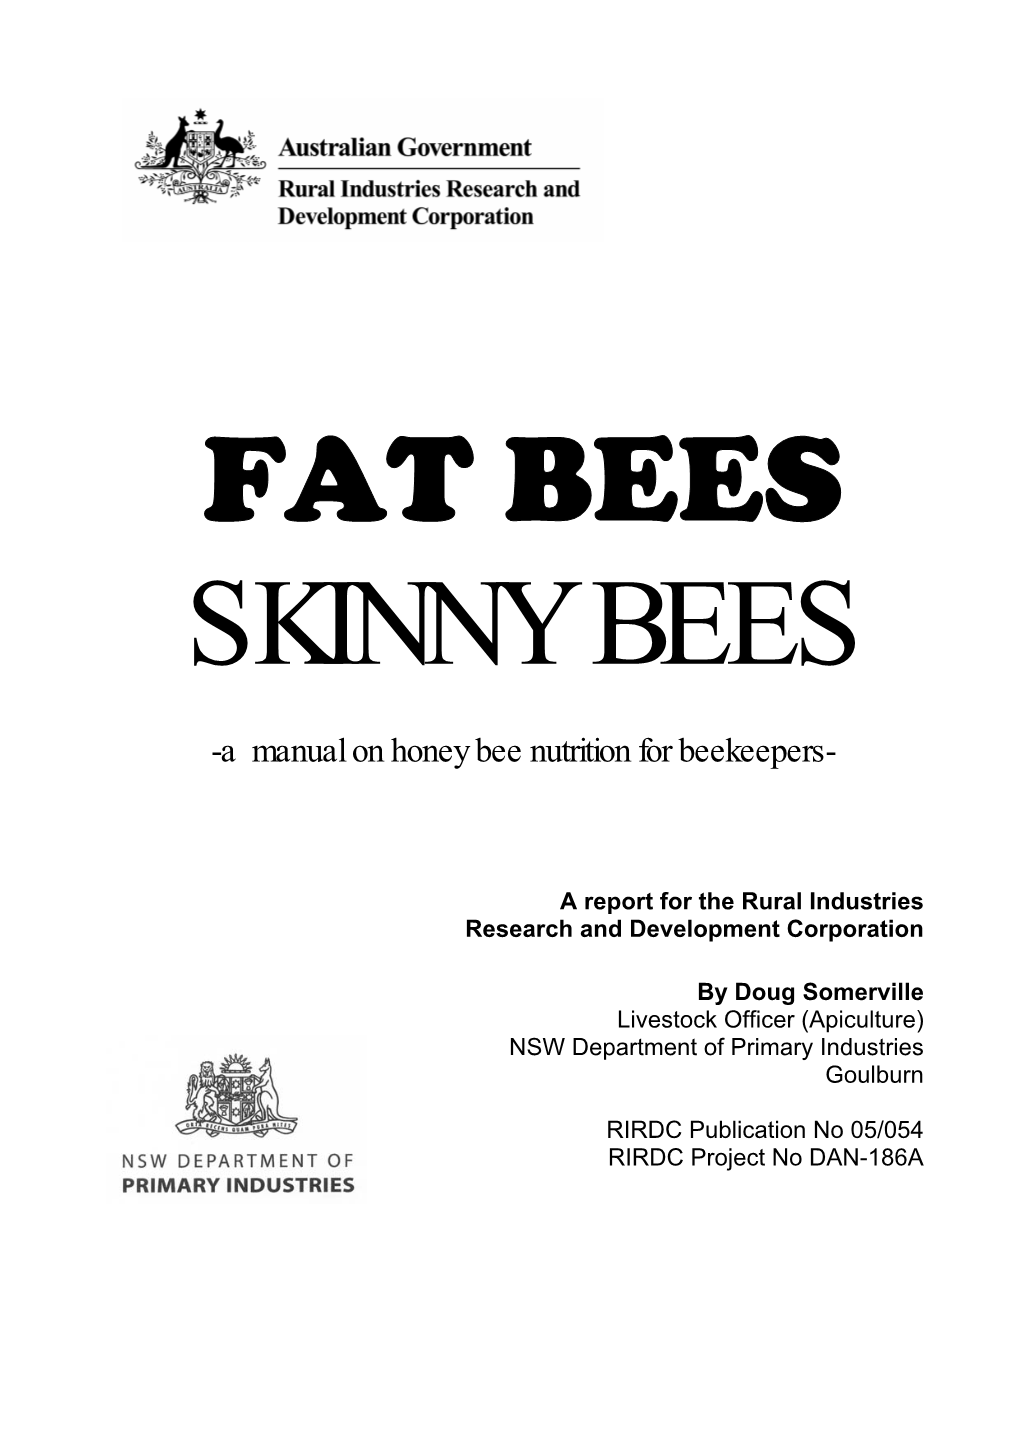 Fat Bees Skinny Bees, a Manual on Honey Bee Nutrition for Beekeepers. Rural